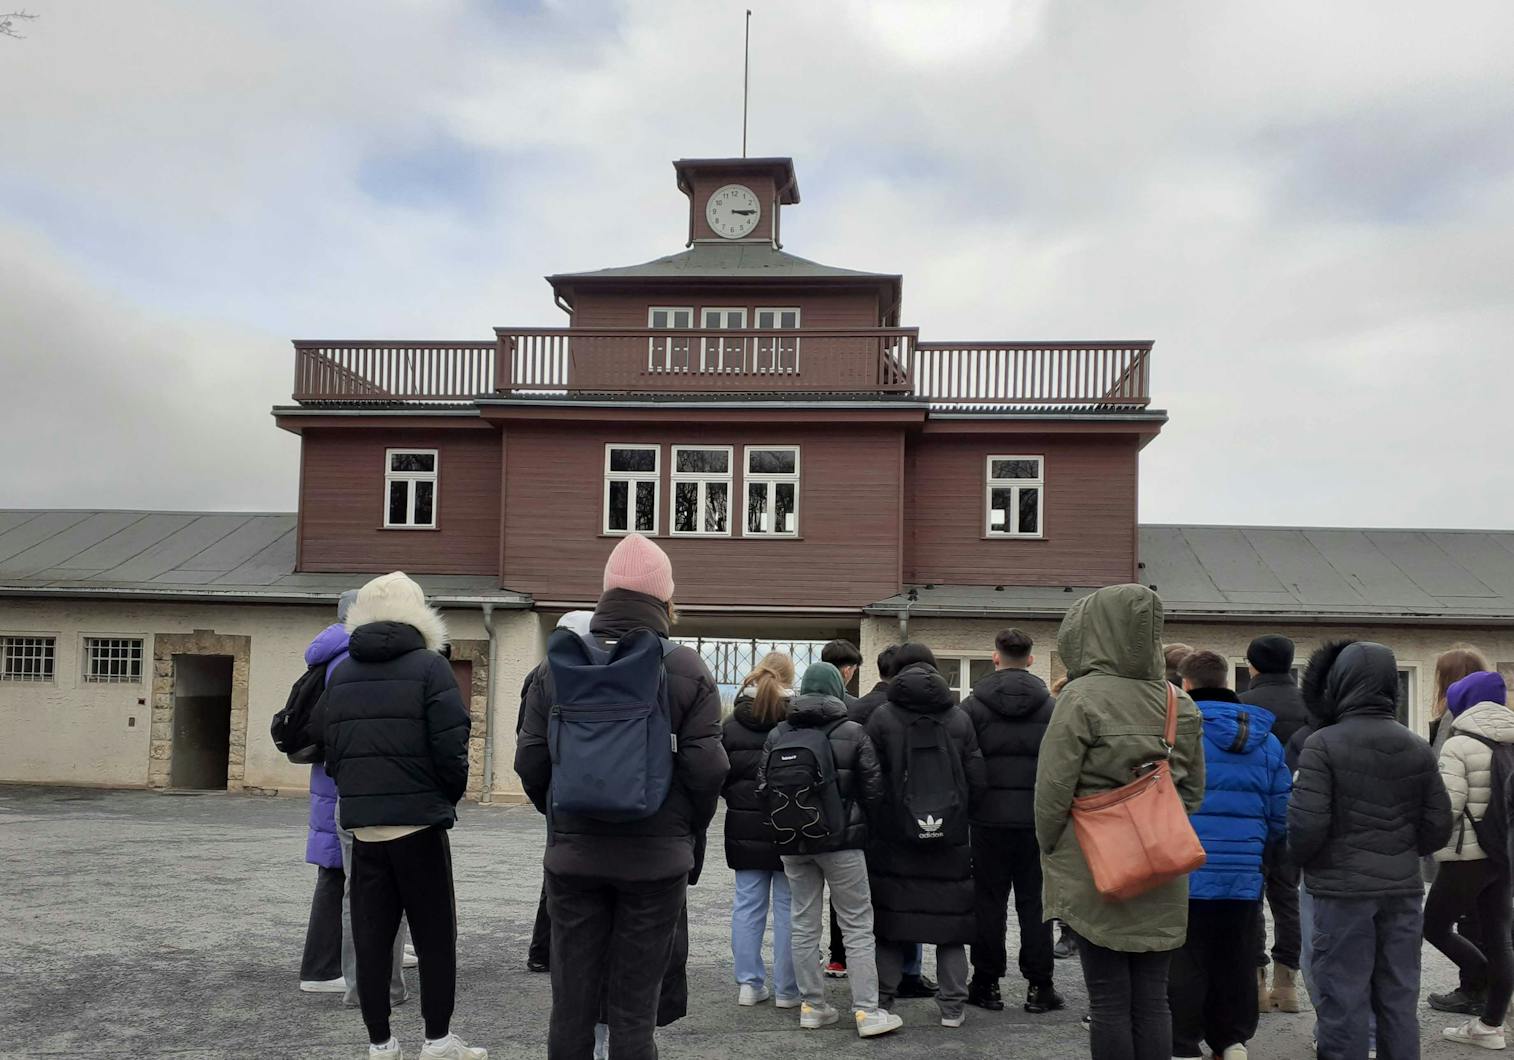 People standing with their backs turned in front of the entrance to Buchenwald